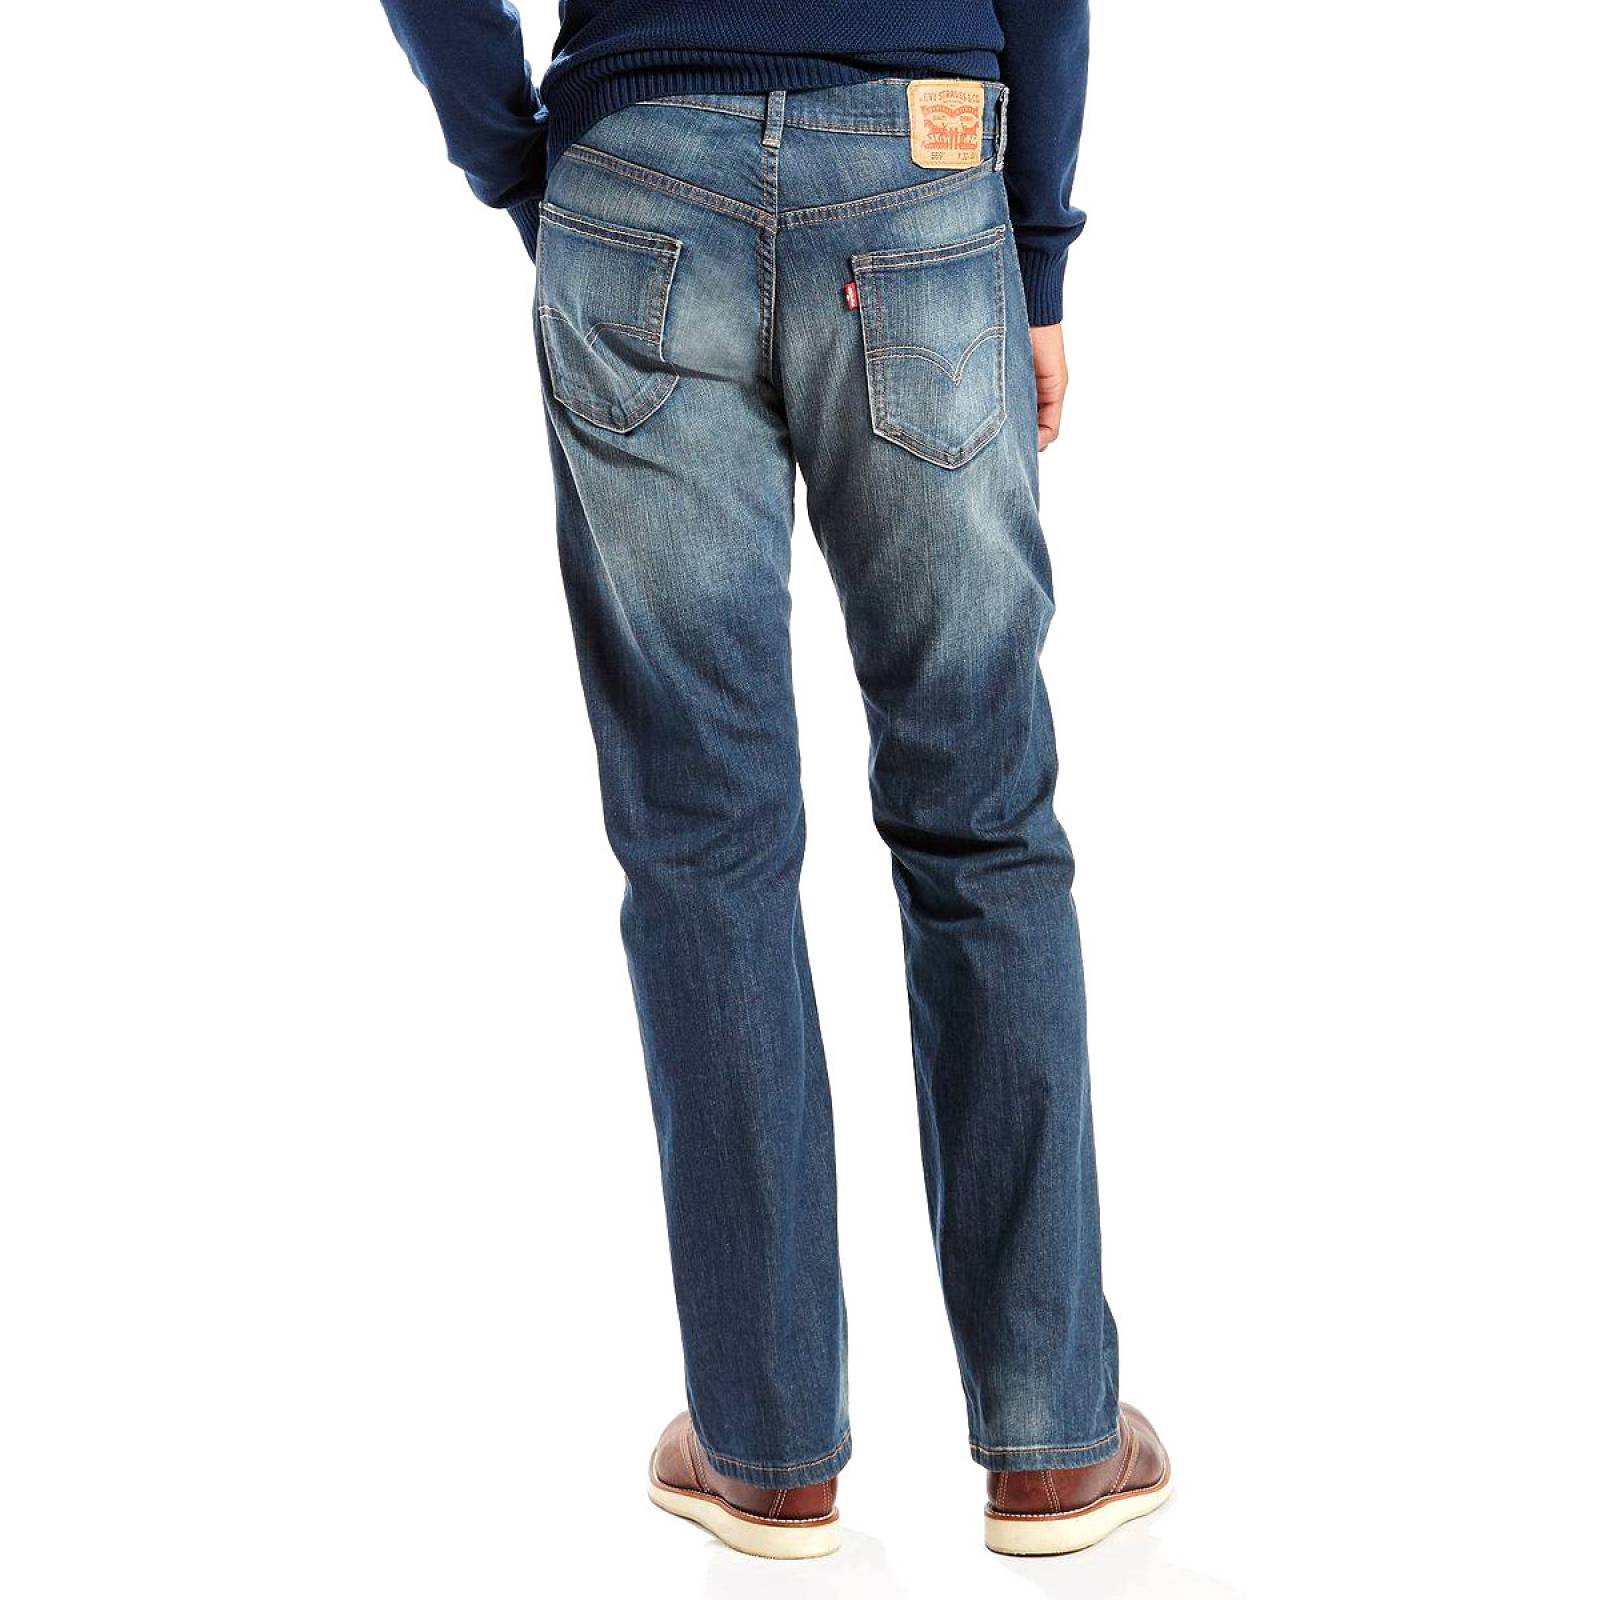 Jeans 559 Relaxed Aight Big & Tall para Caballero